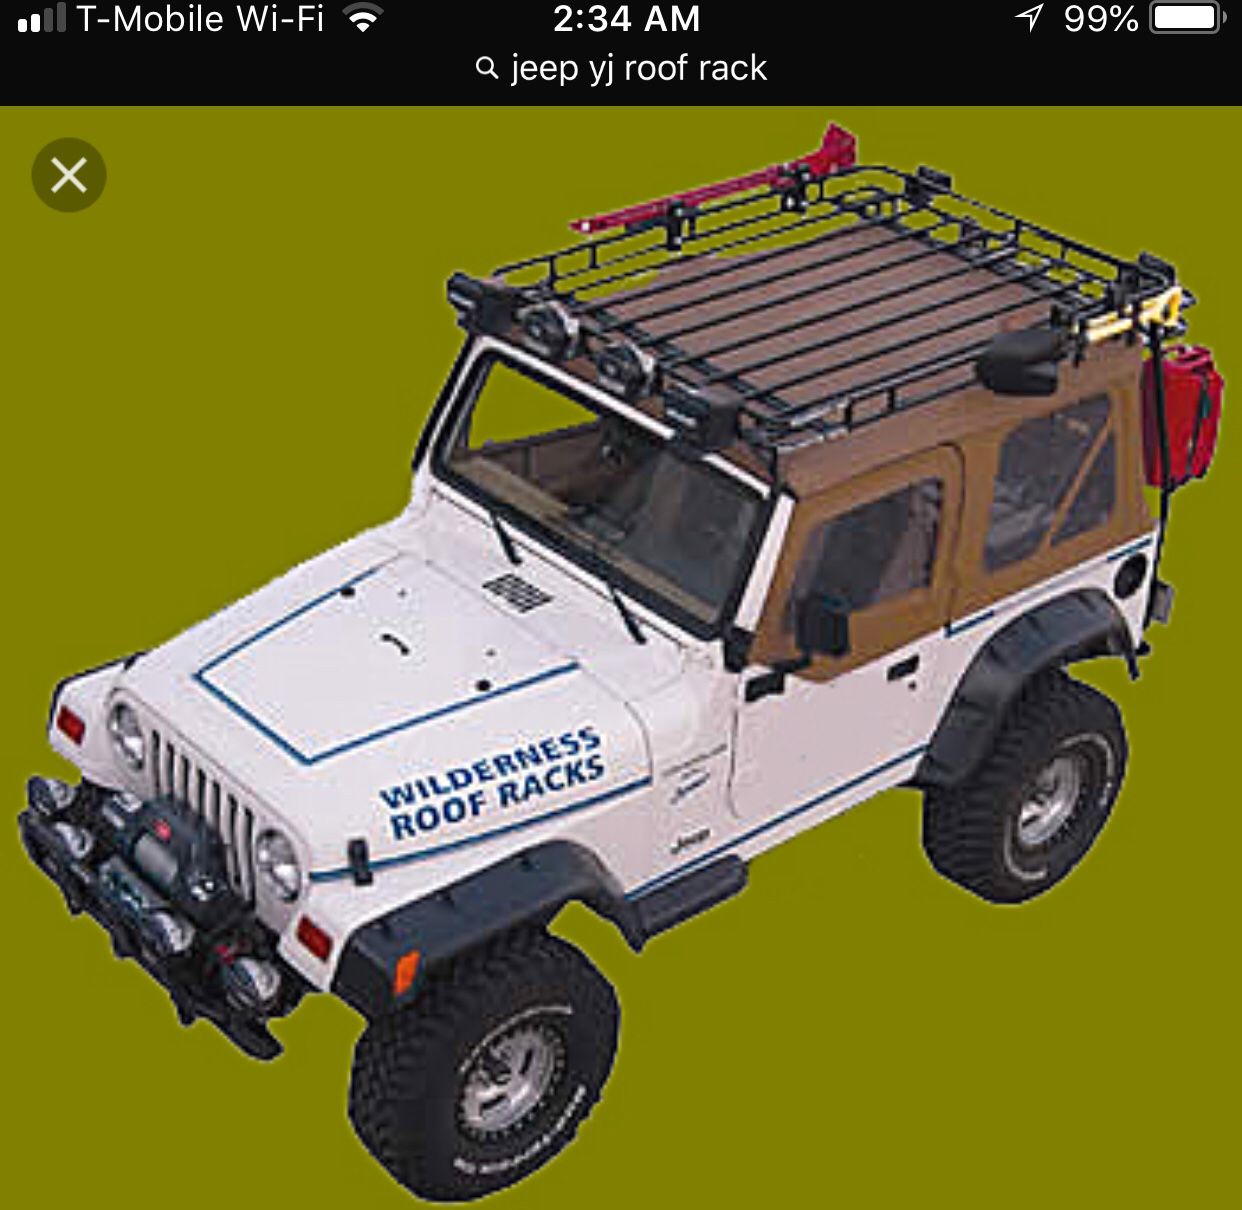 Jeep Wrangler YJ Roof rack camping for Sale in San Jacinto, CA - OfferUp